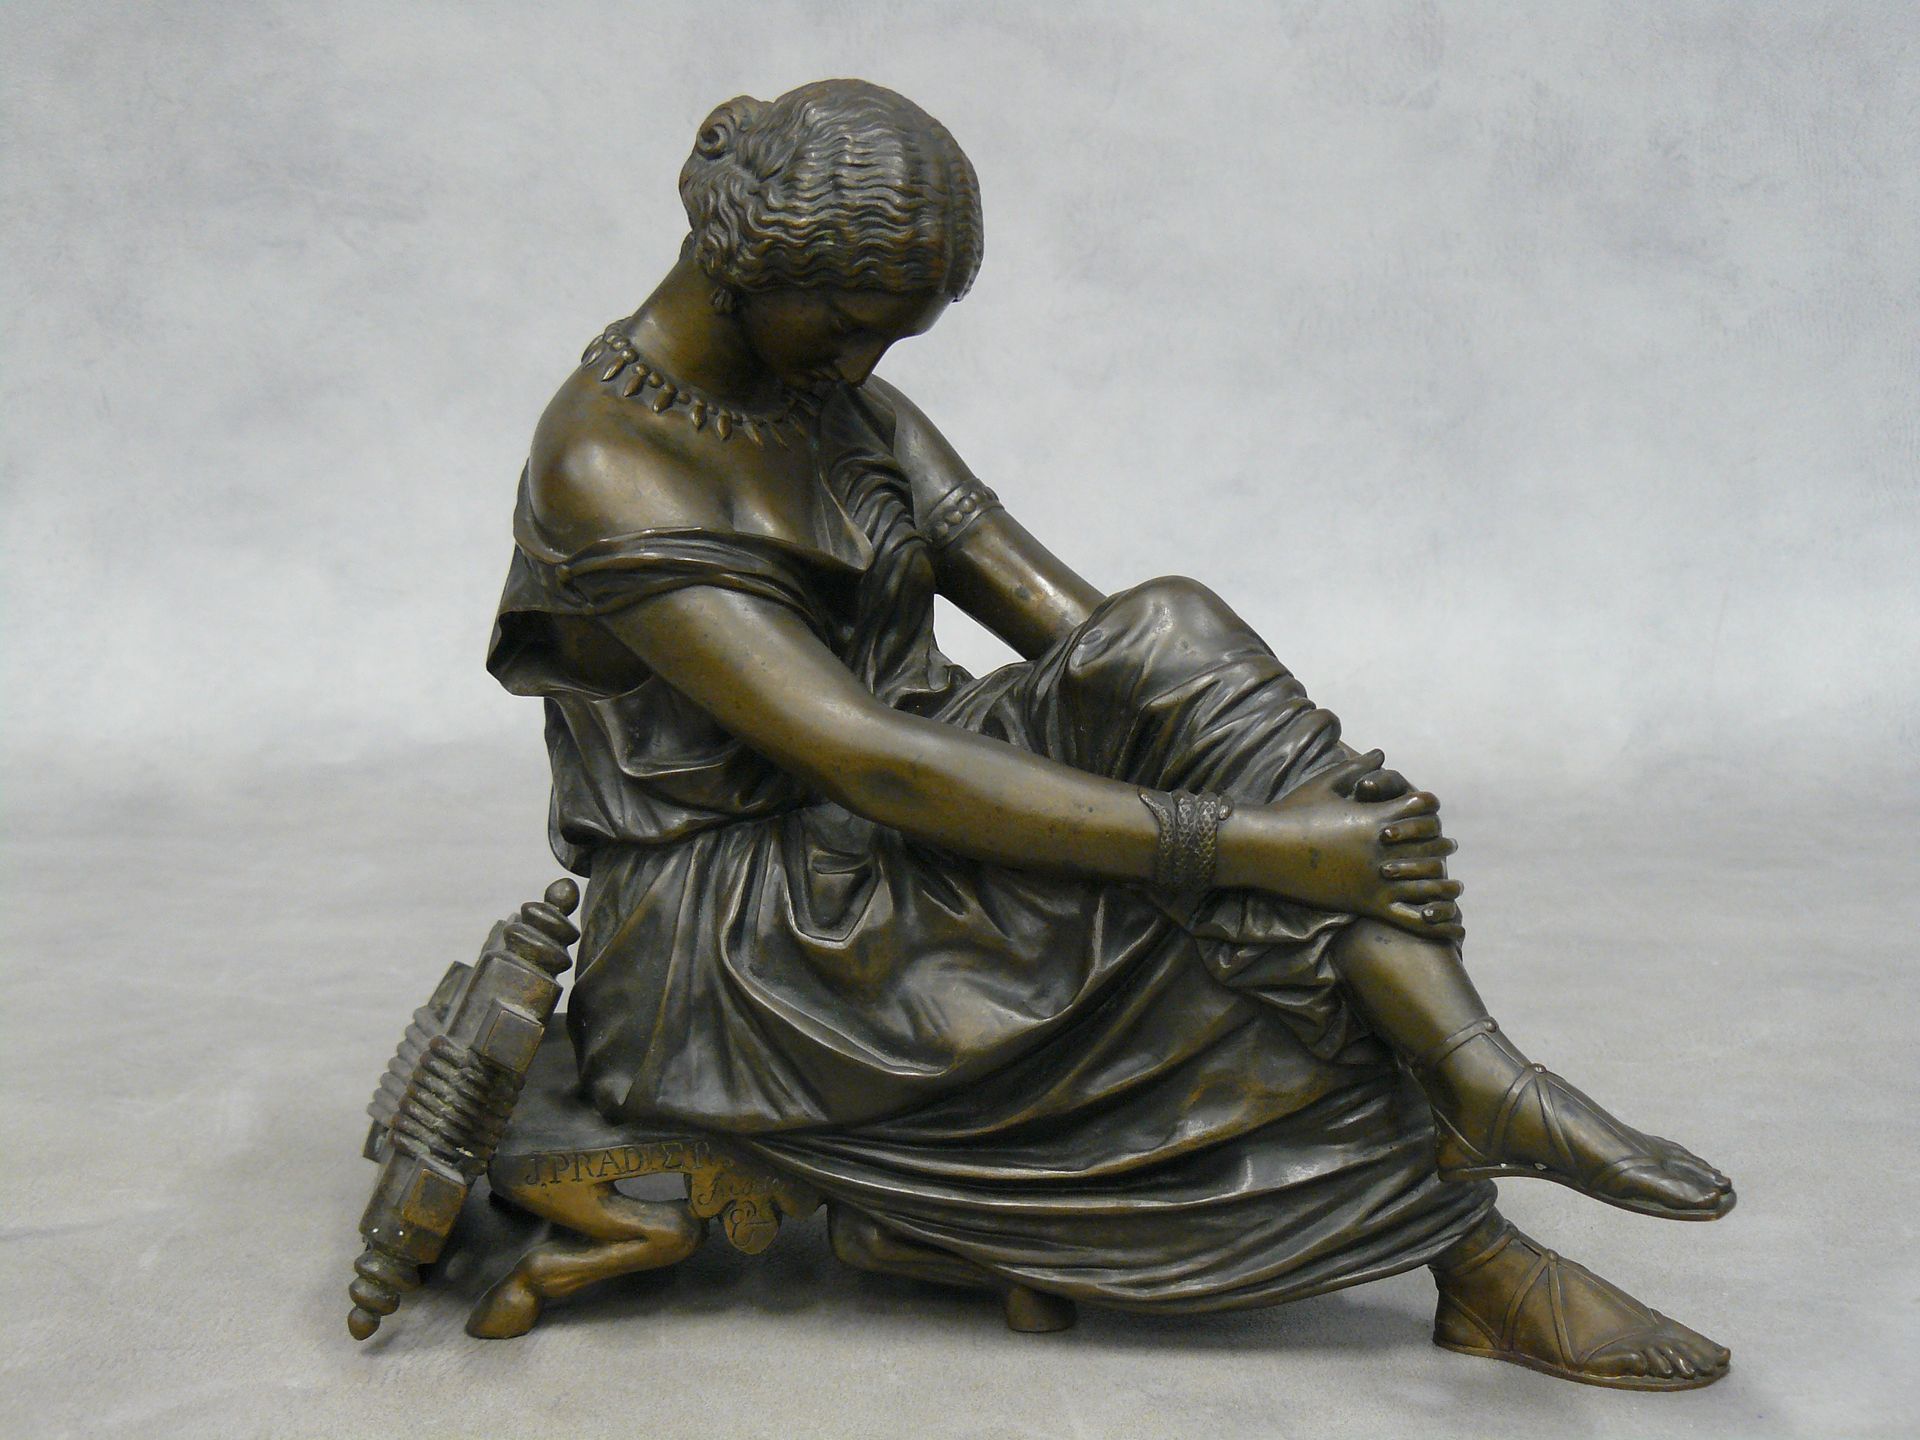 PRDIER James PRADIER (1790-1852) after: Sapho seated on a stool, the animal hock&hellip;